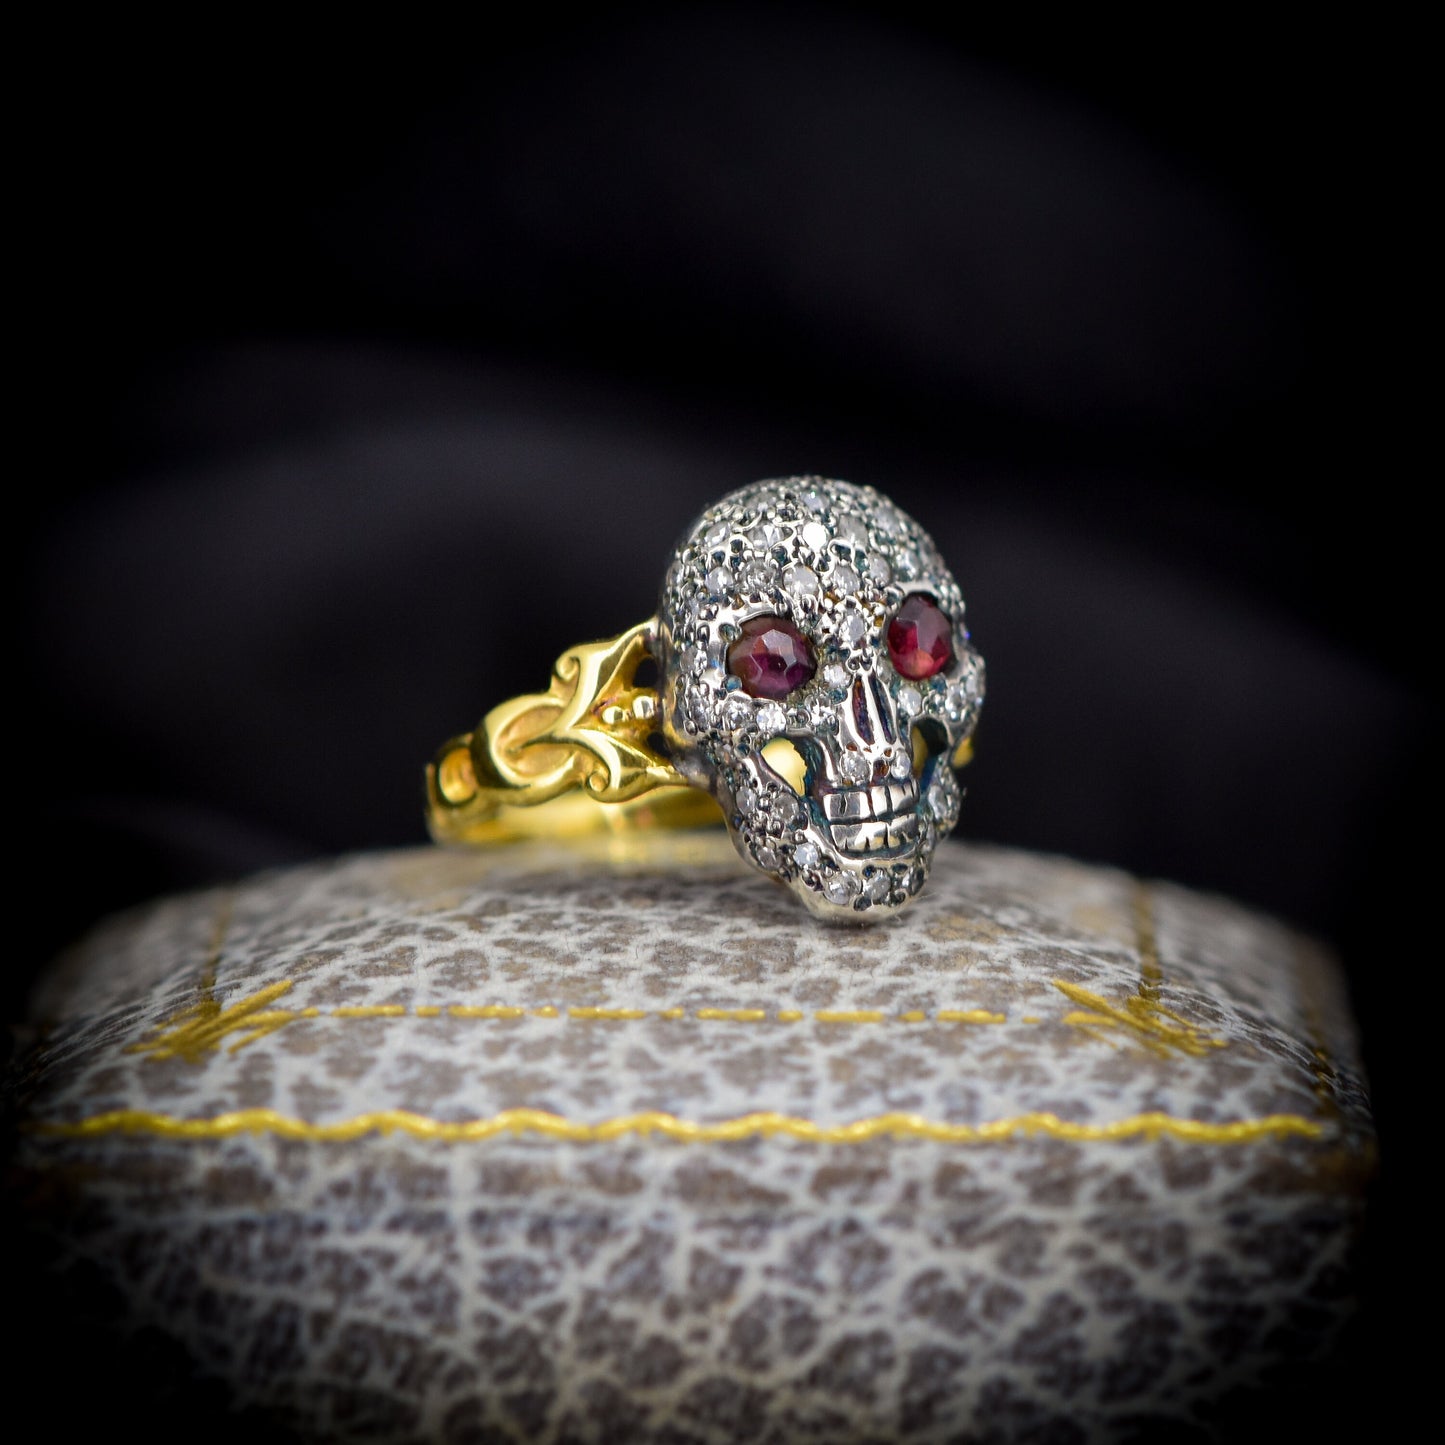 Diamond and Garnet Skull 18ct Yellow Gold and Silver Ring | Antique Style